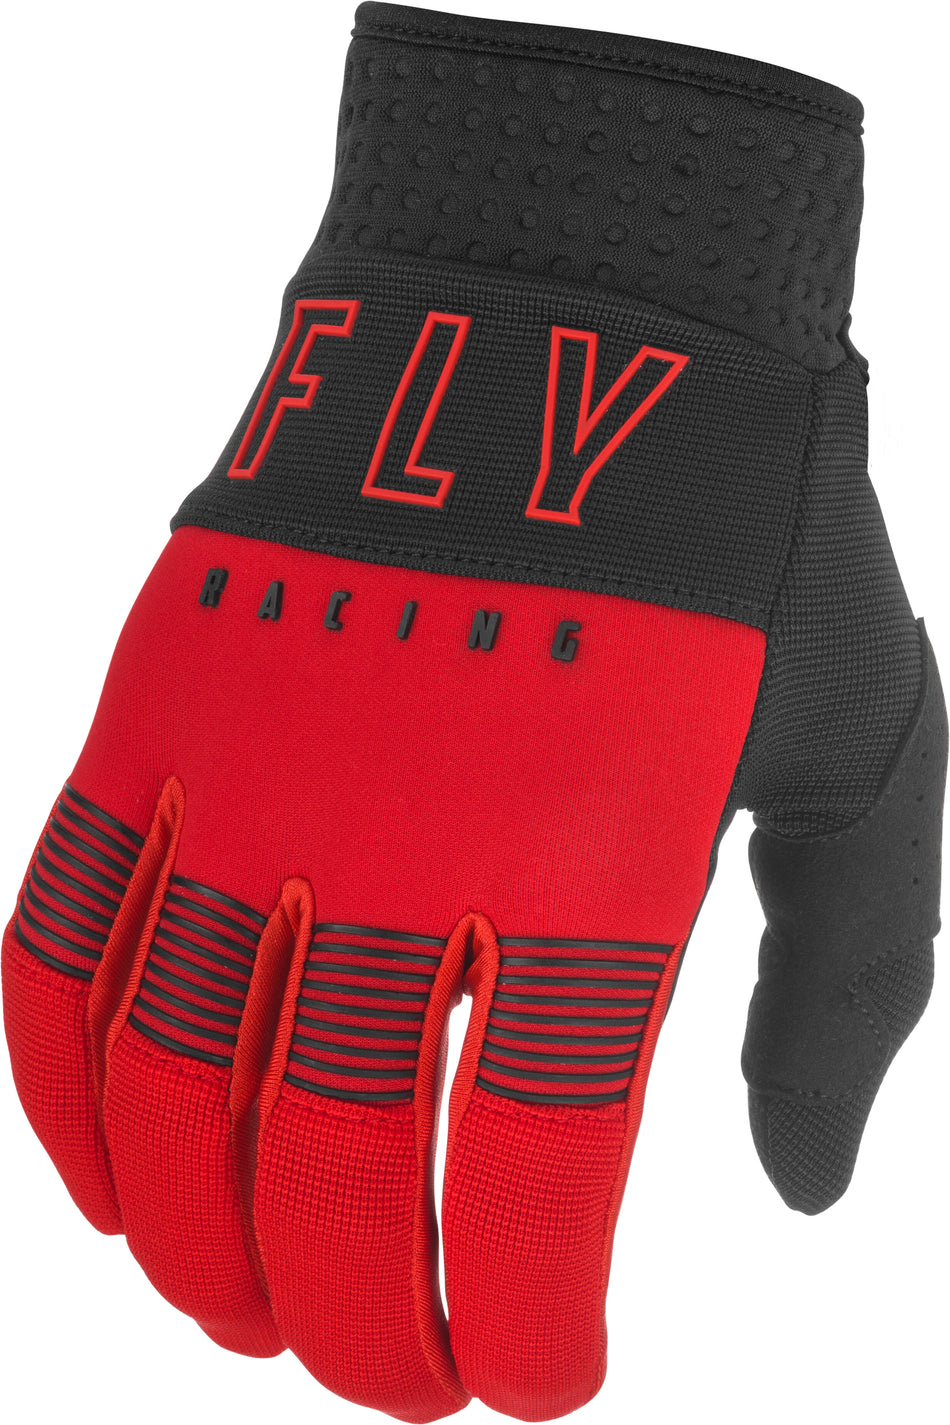 FLY RACING F-16 Gloves Red/Black Sz 10 374-91210